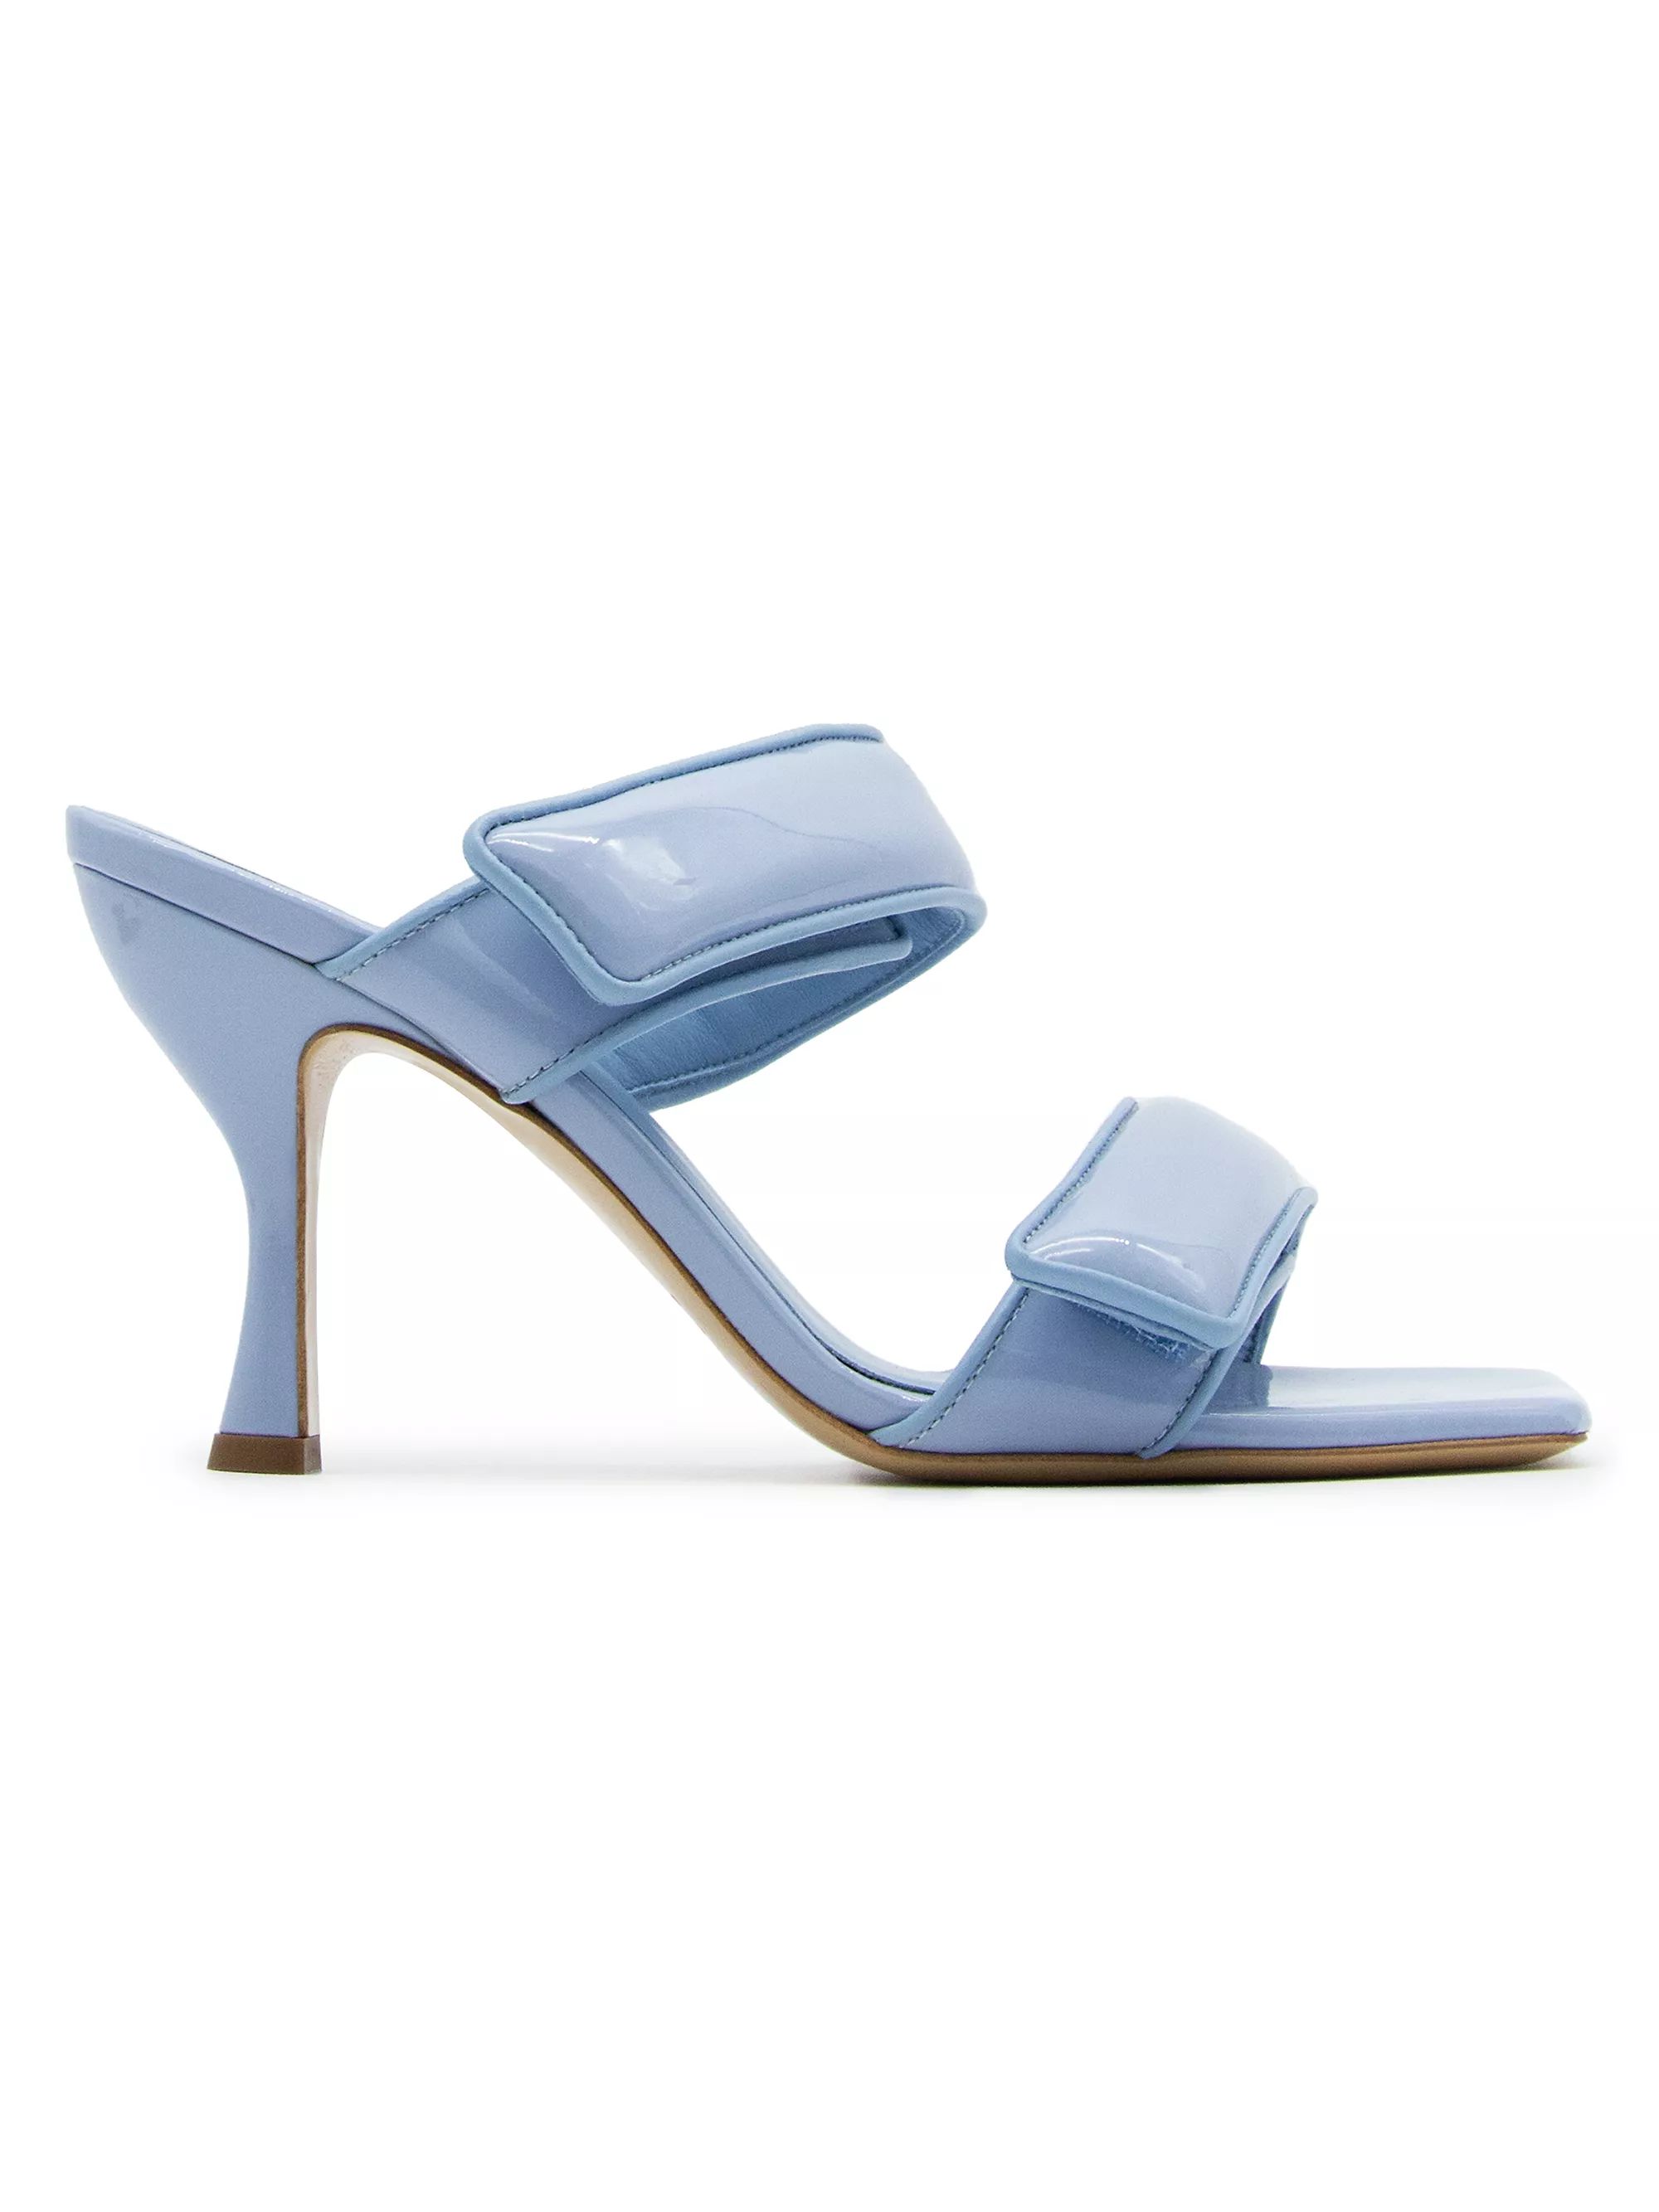 Patent Leather Two-Strap Sandals | Saks Fifth Avenue